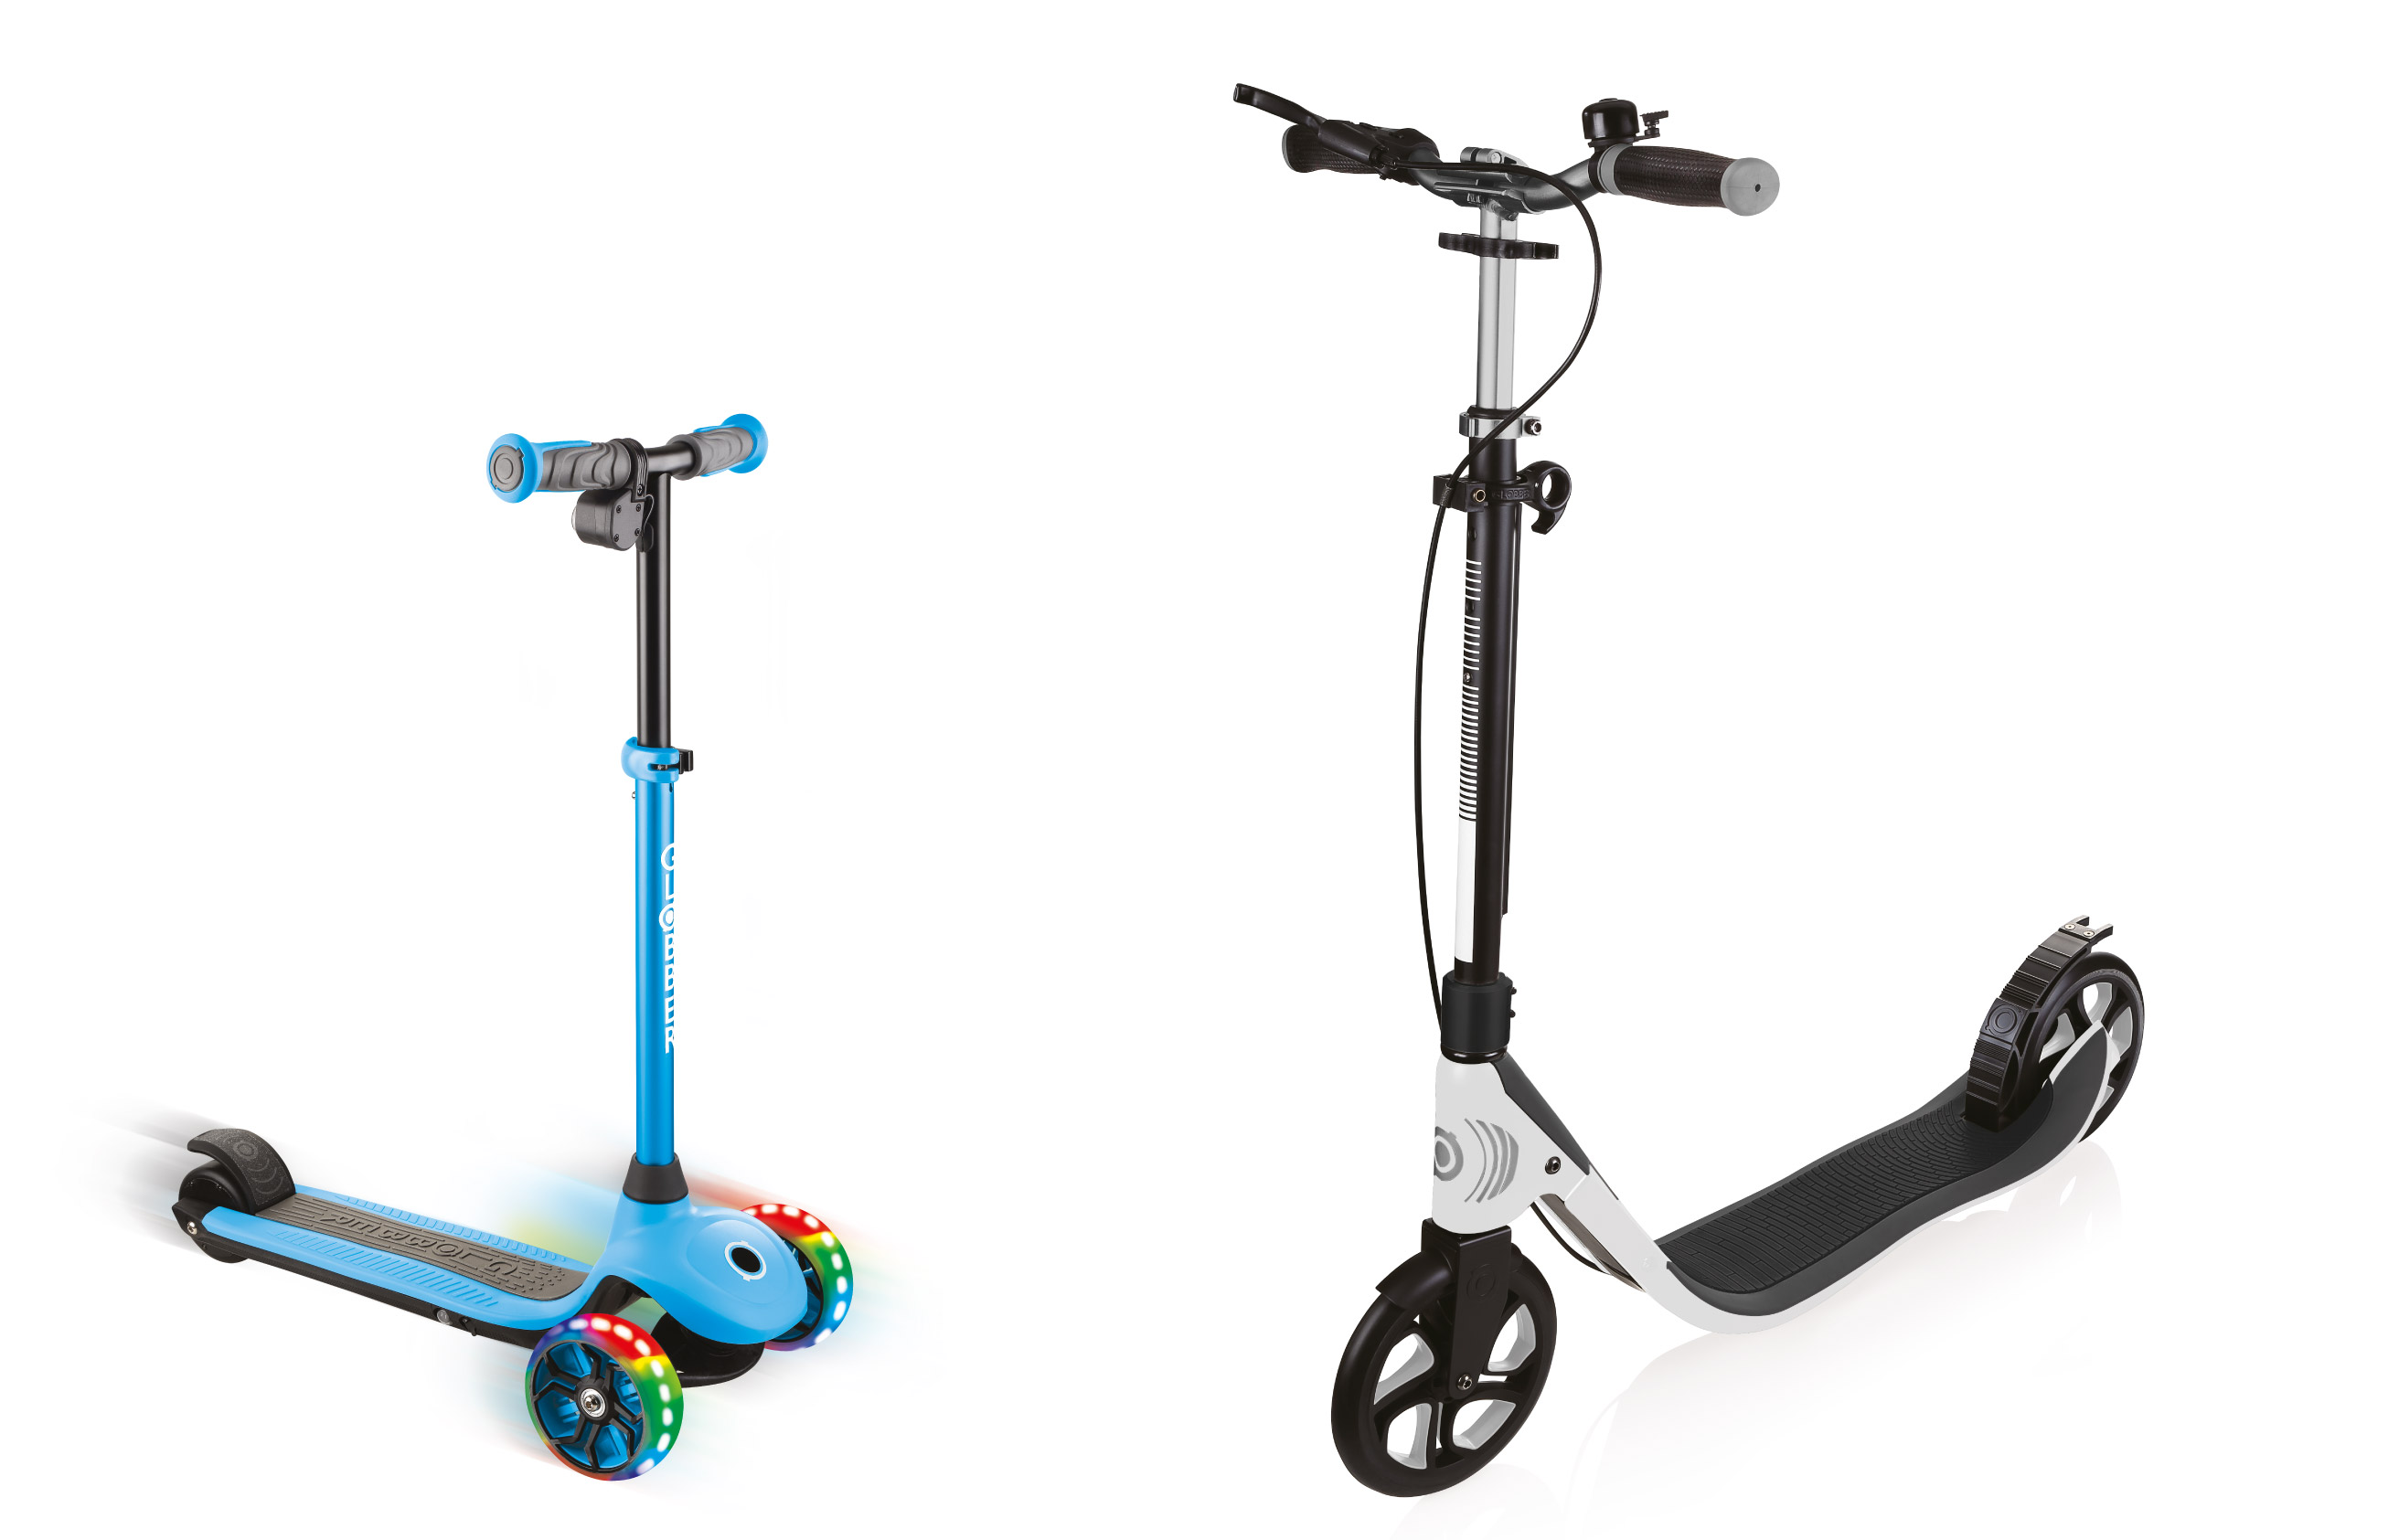 ONE K E-MOTION electric scooter and ONE NL 205 DELUXE 2-wheel scooter